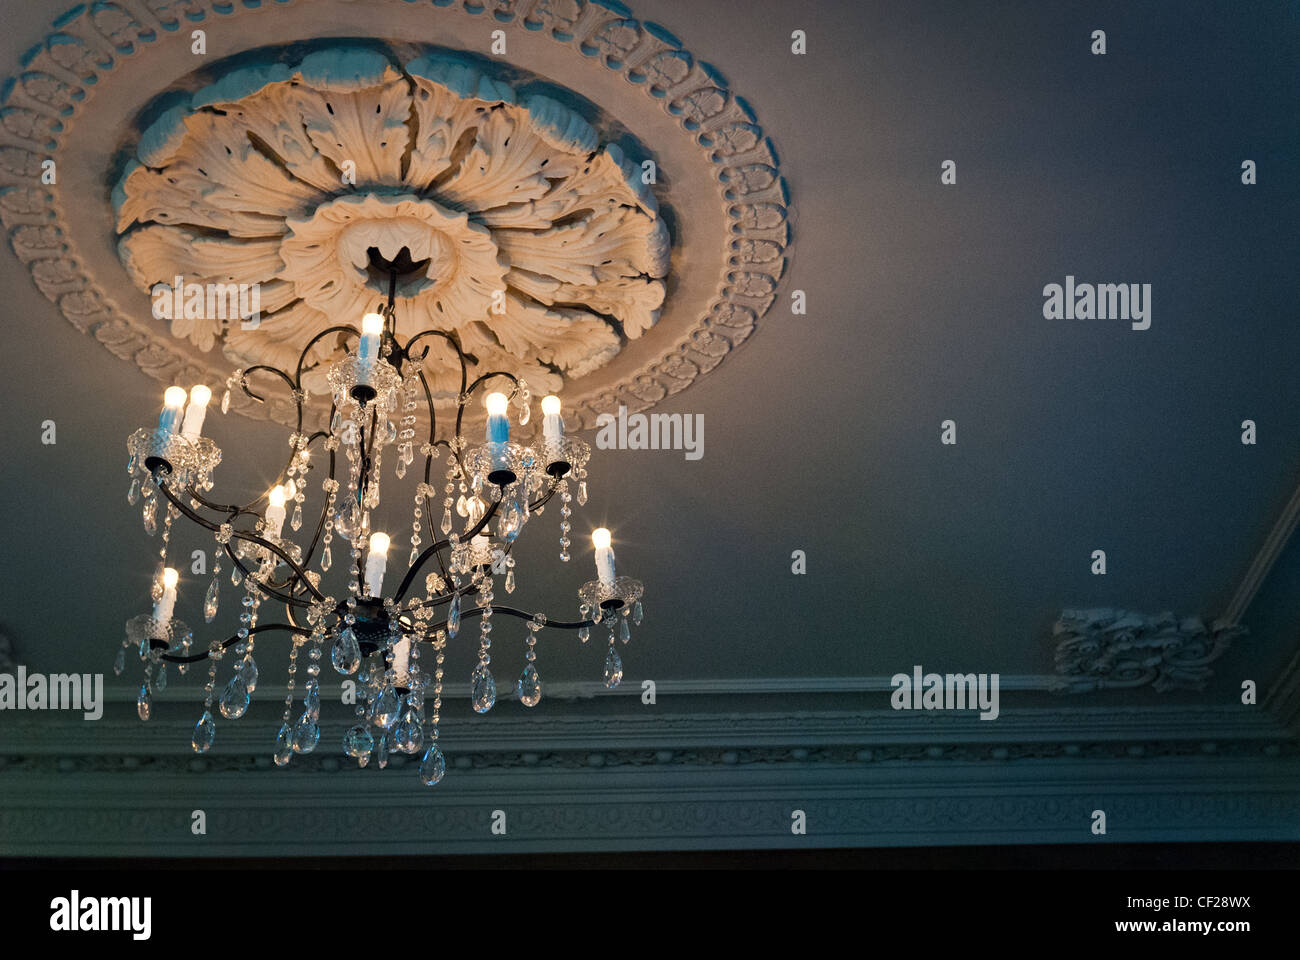 A chandelier hanging from the ceiling surrounded by a detailed plaster surround Stock Photo